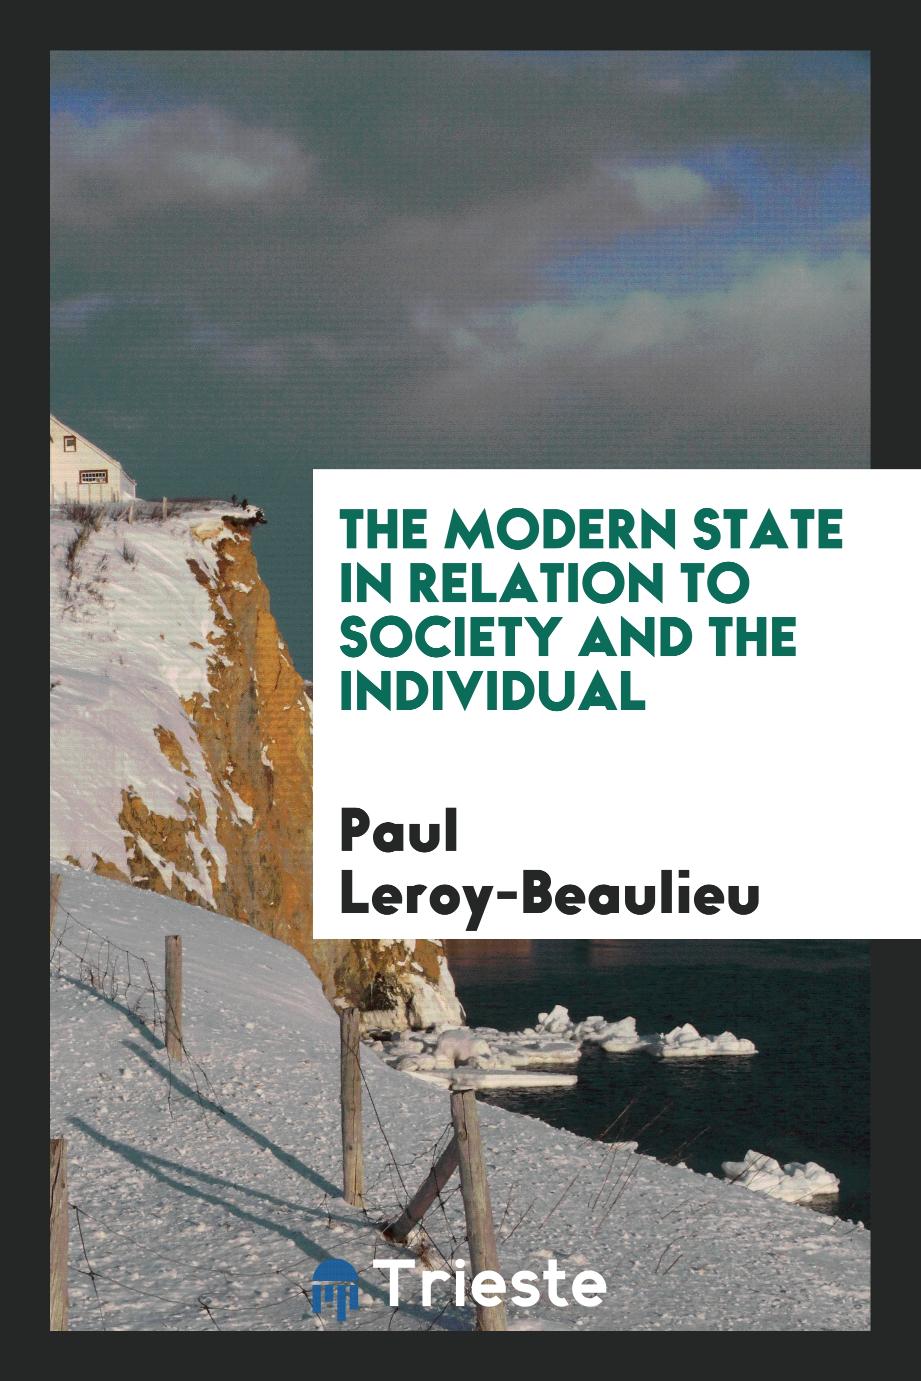 The modern state in relation to society and the individual